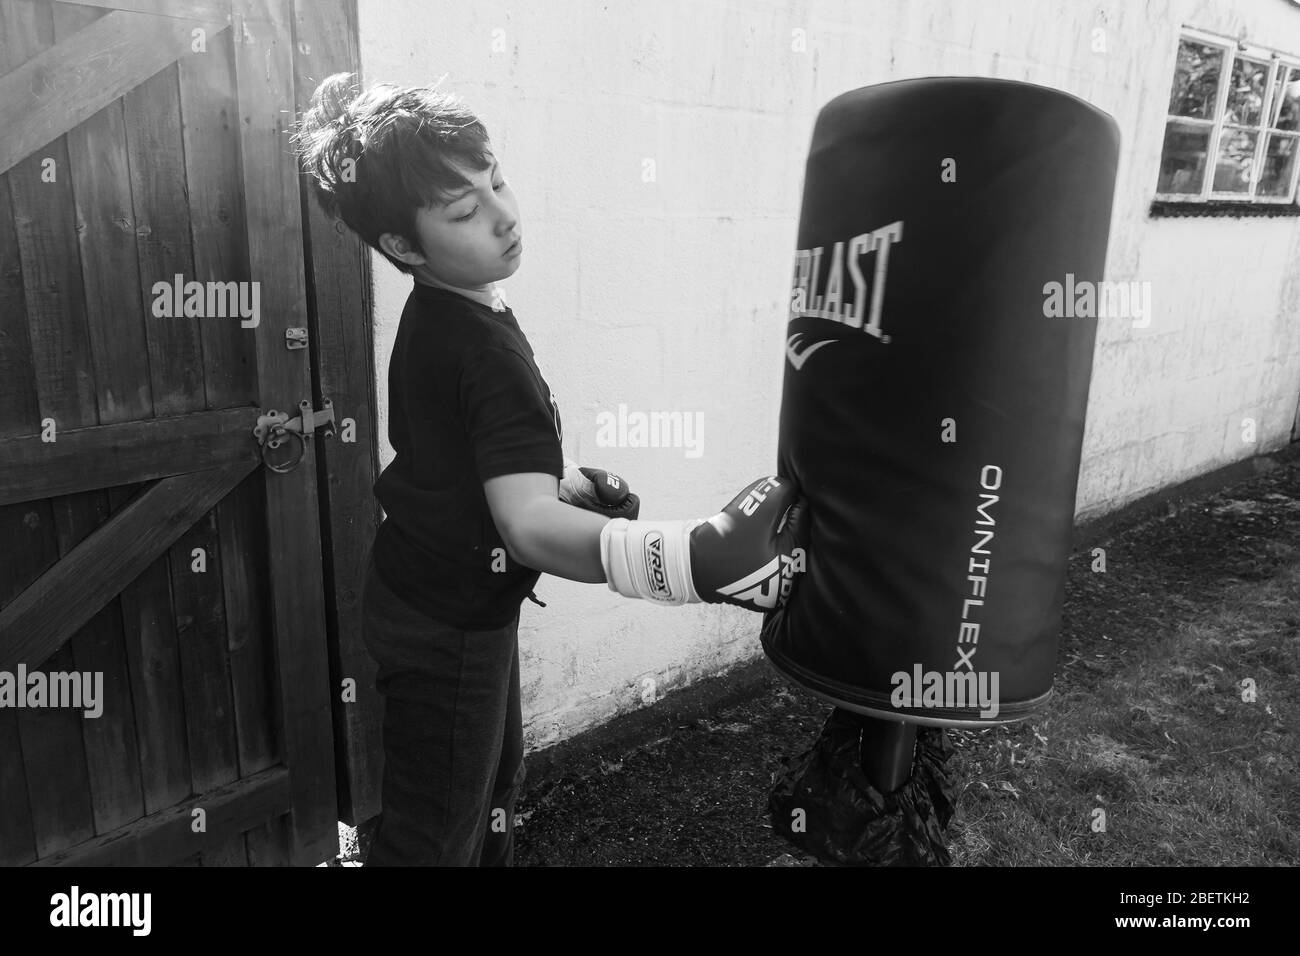 A young boy wearing boxing gloves punch a punching bag in the garden for exercise. Stock Photo